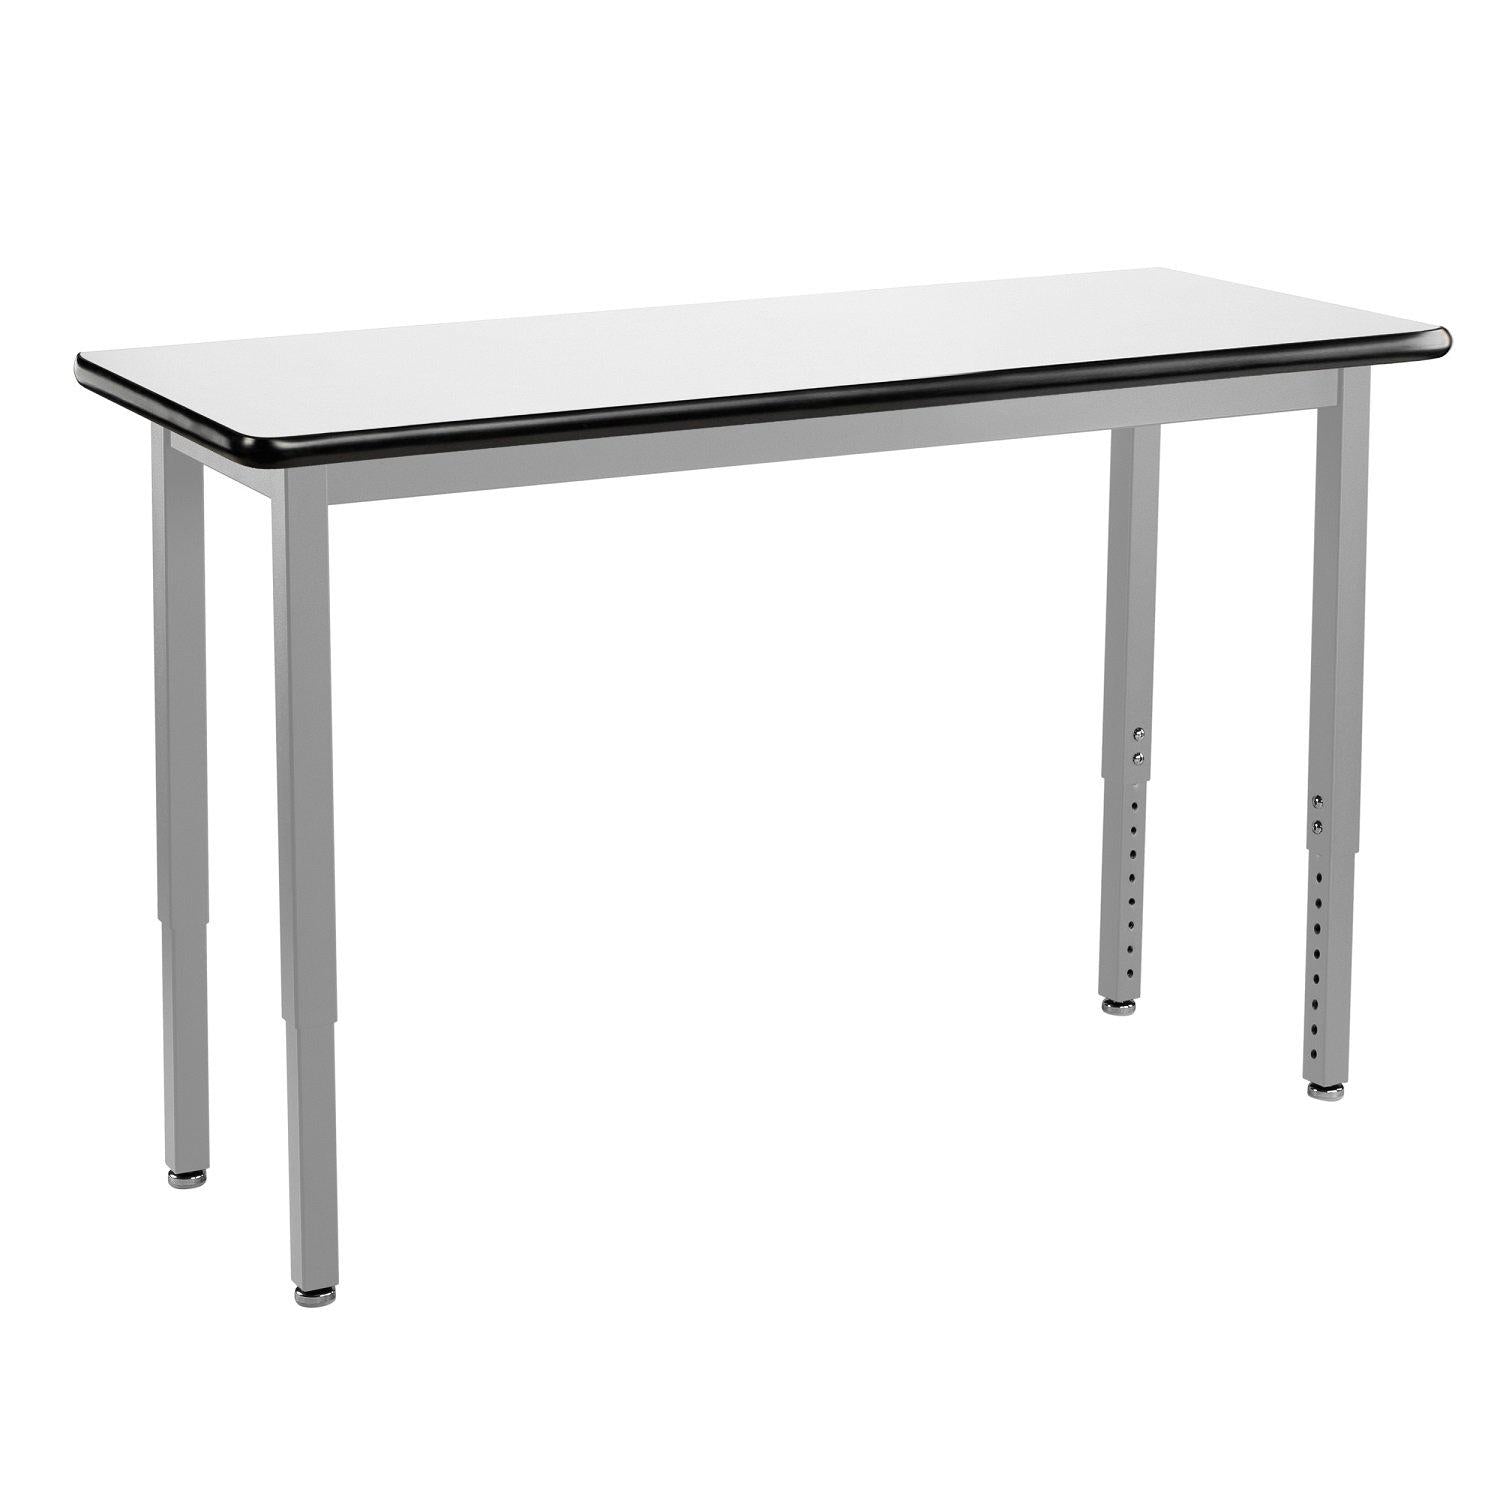 Heavy-Duty Height-Adjustable Utility Table, Soft Grey Frame, 18" x 42", Whiteboard High-Pressure Laminate Top